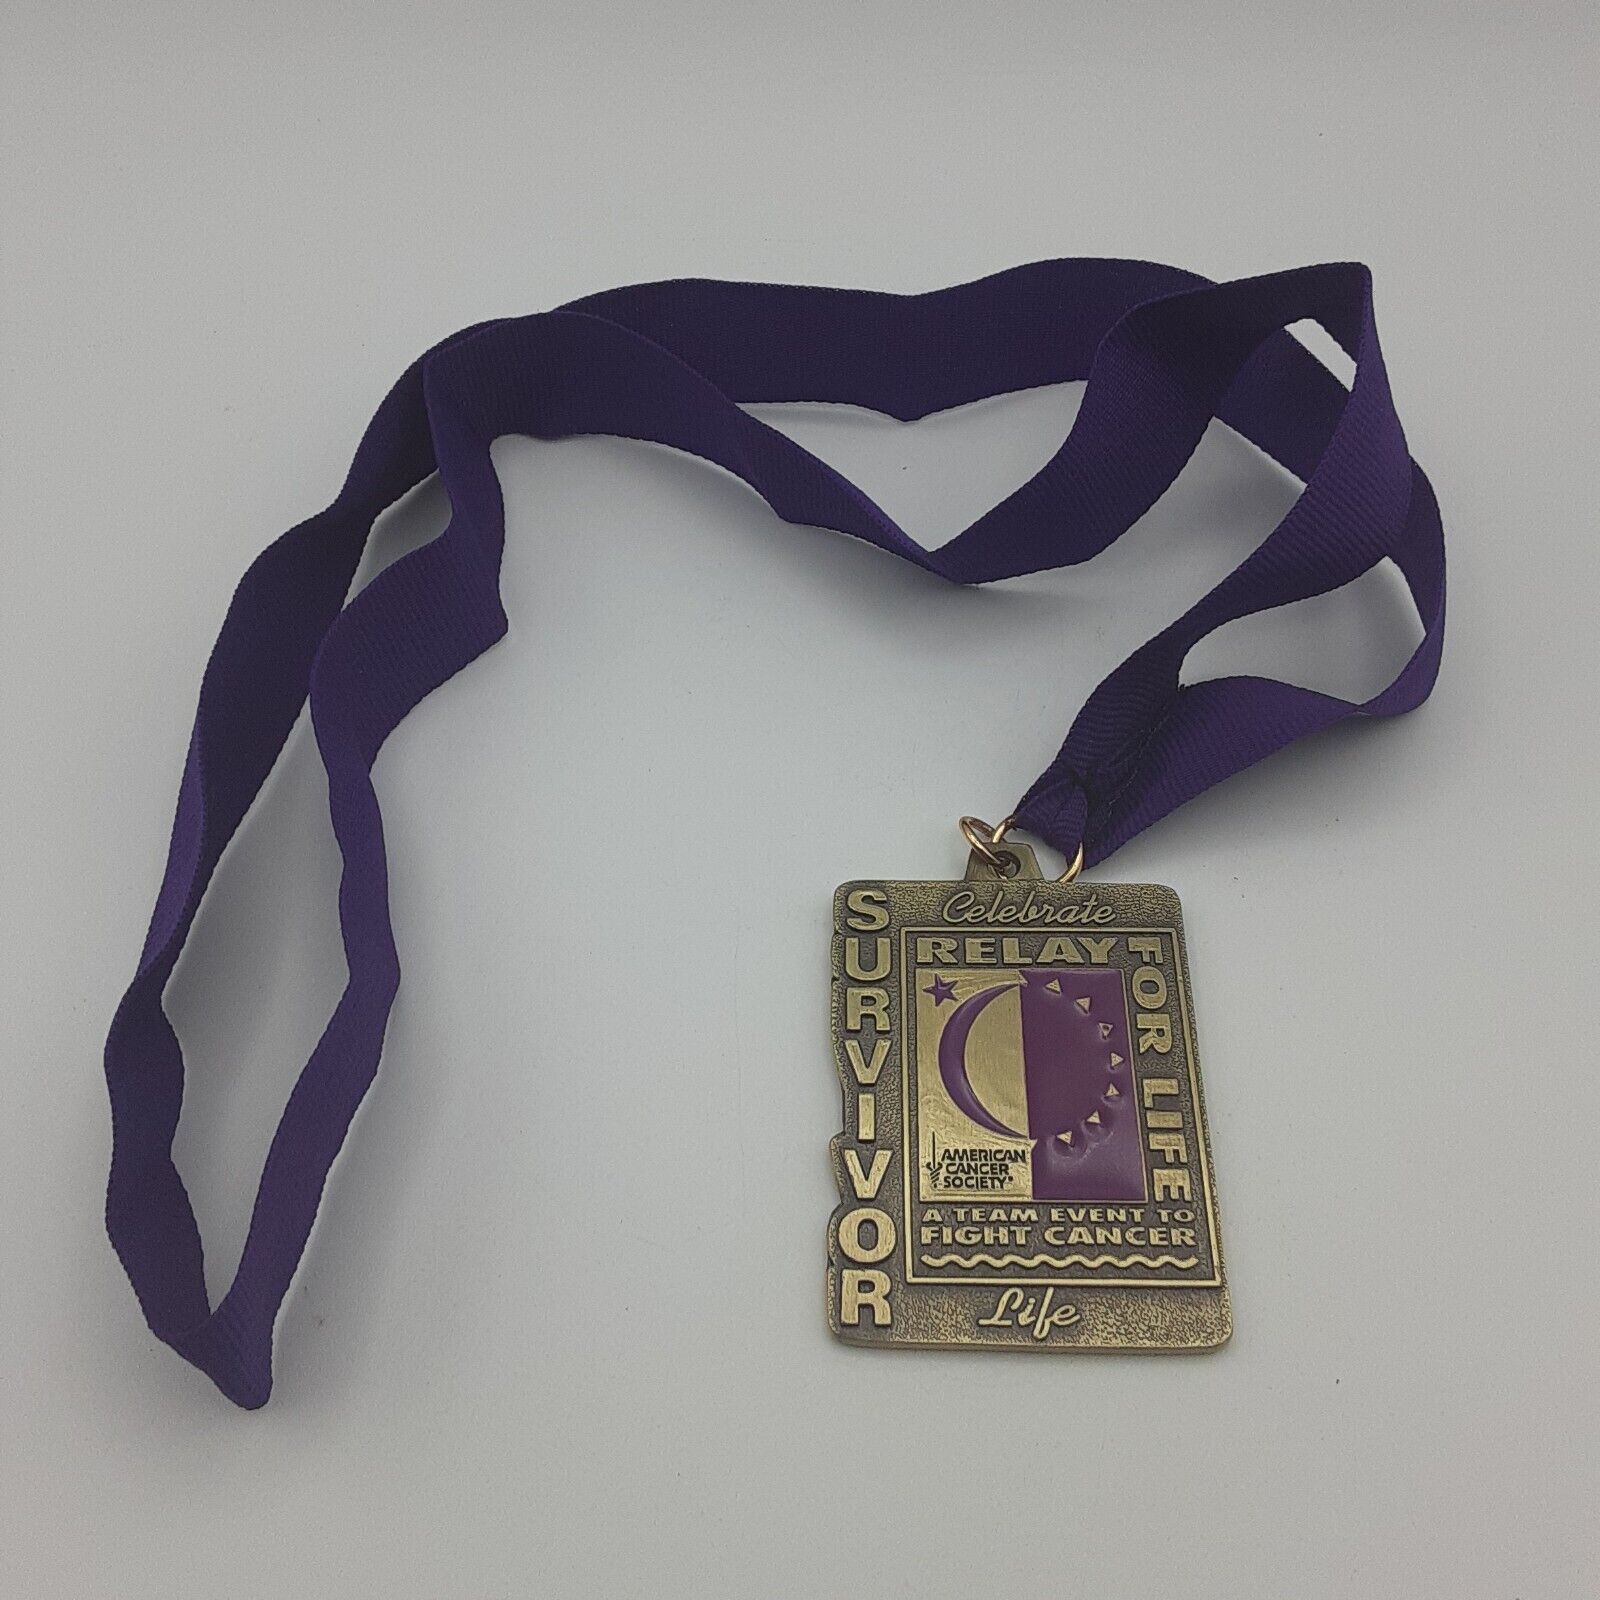 American Cancer Society Survivor Relay For Life Medal Pendant Necklace Lanyard